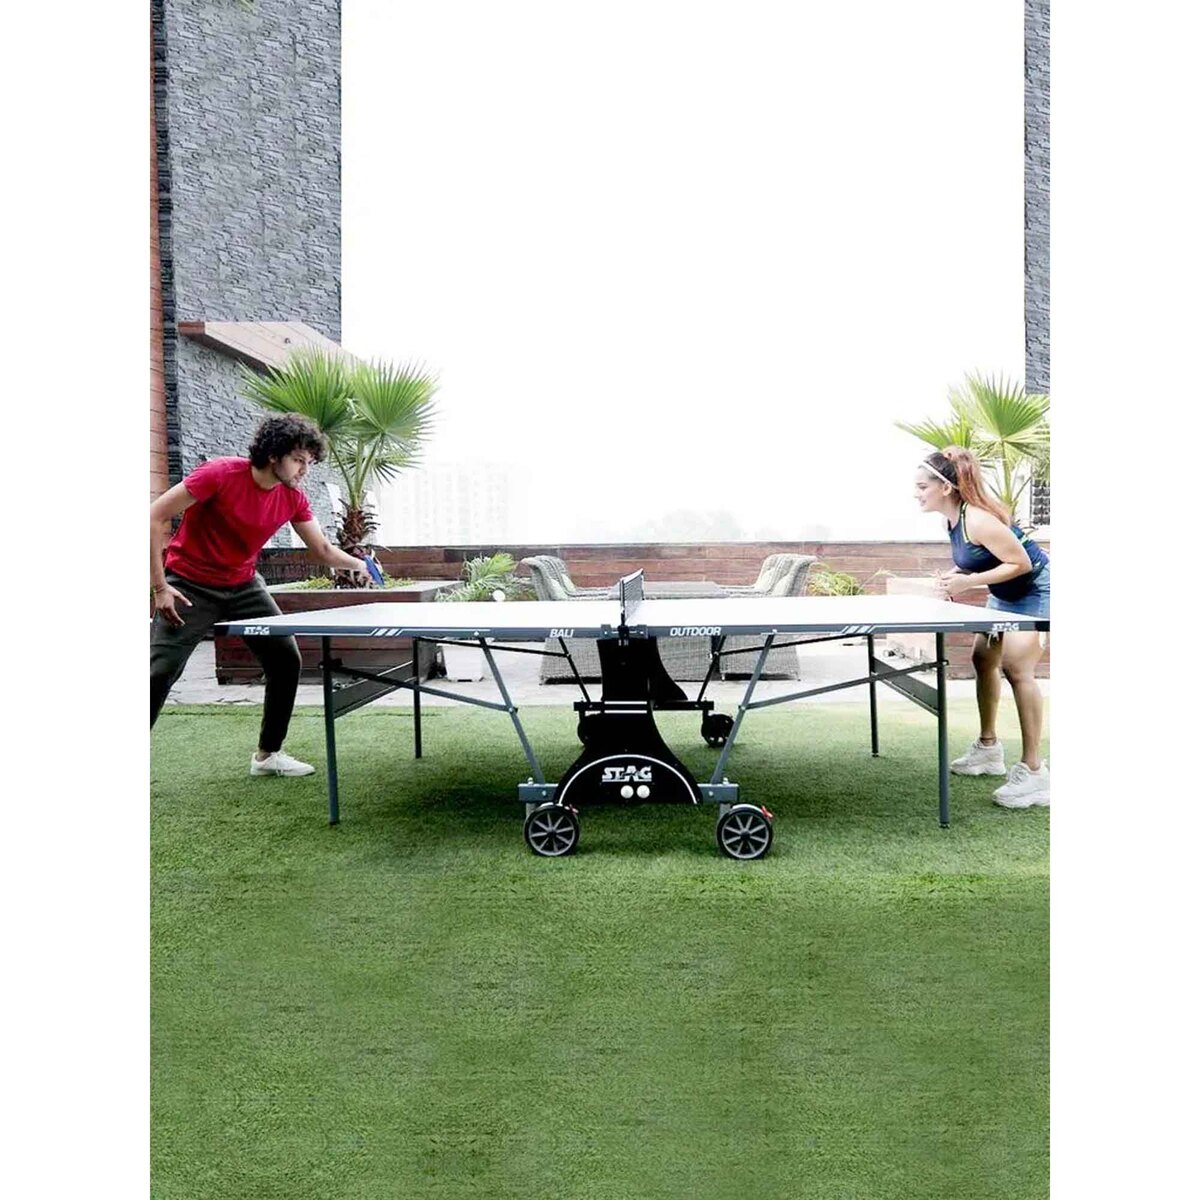 Stag Bali Outdoor Table Tennis Table, SG-CAYMAN